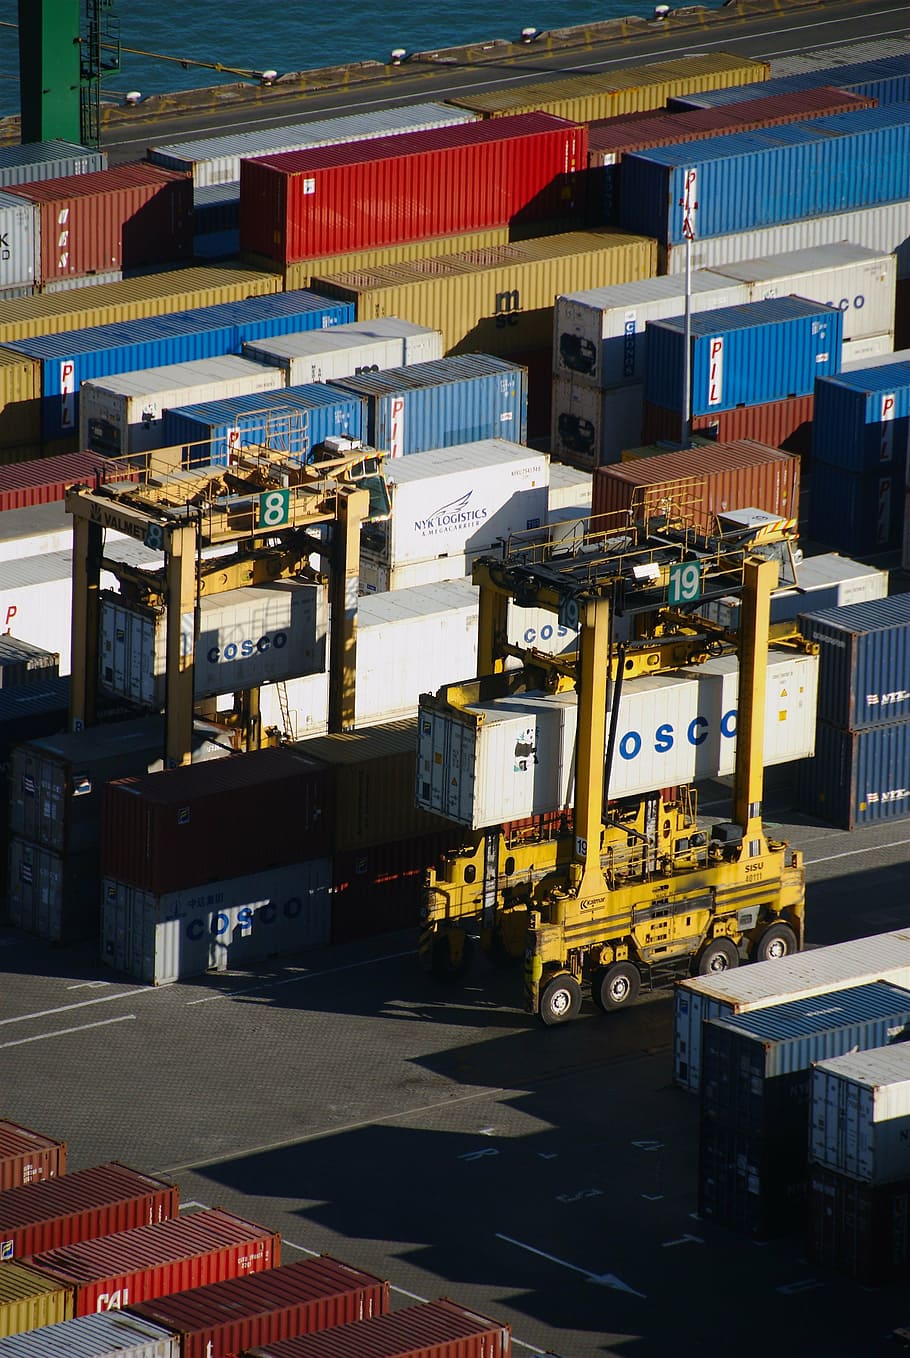 intermodal container lot, cargo, shipping, port, harbor, freight